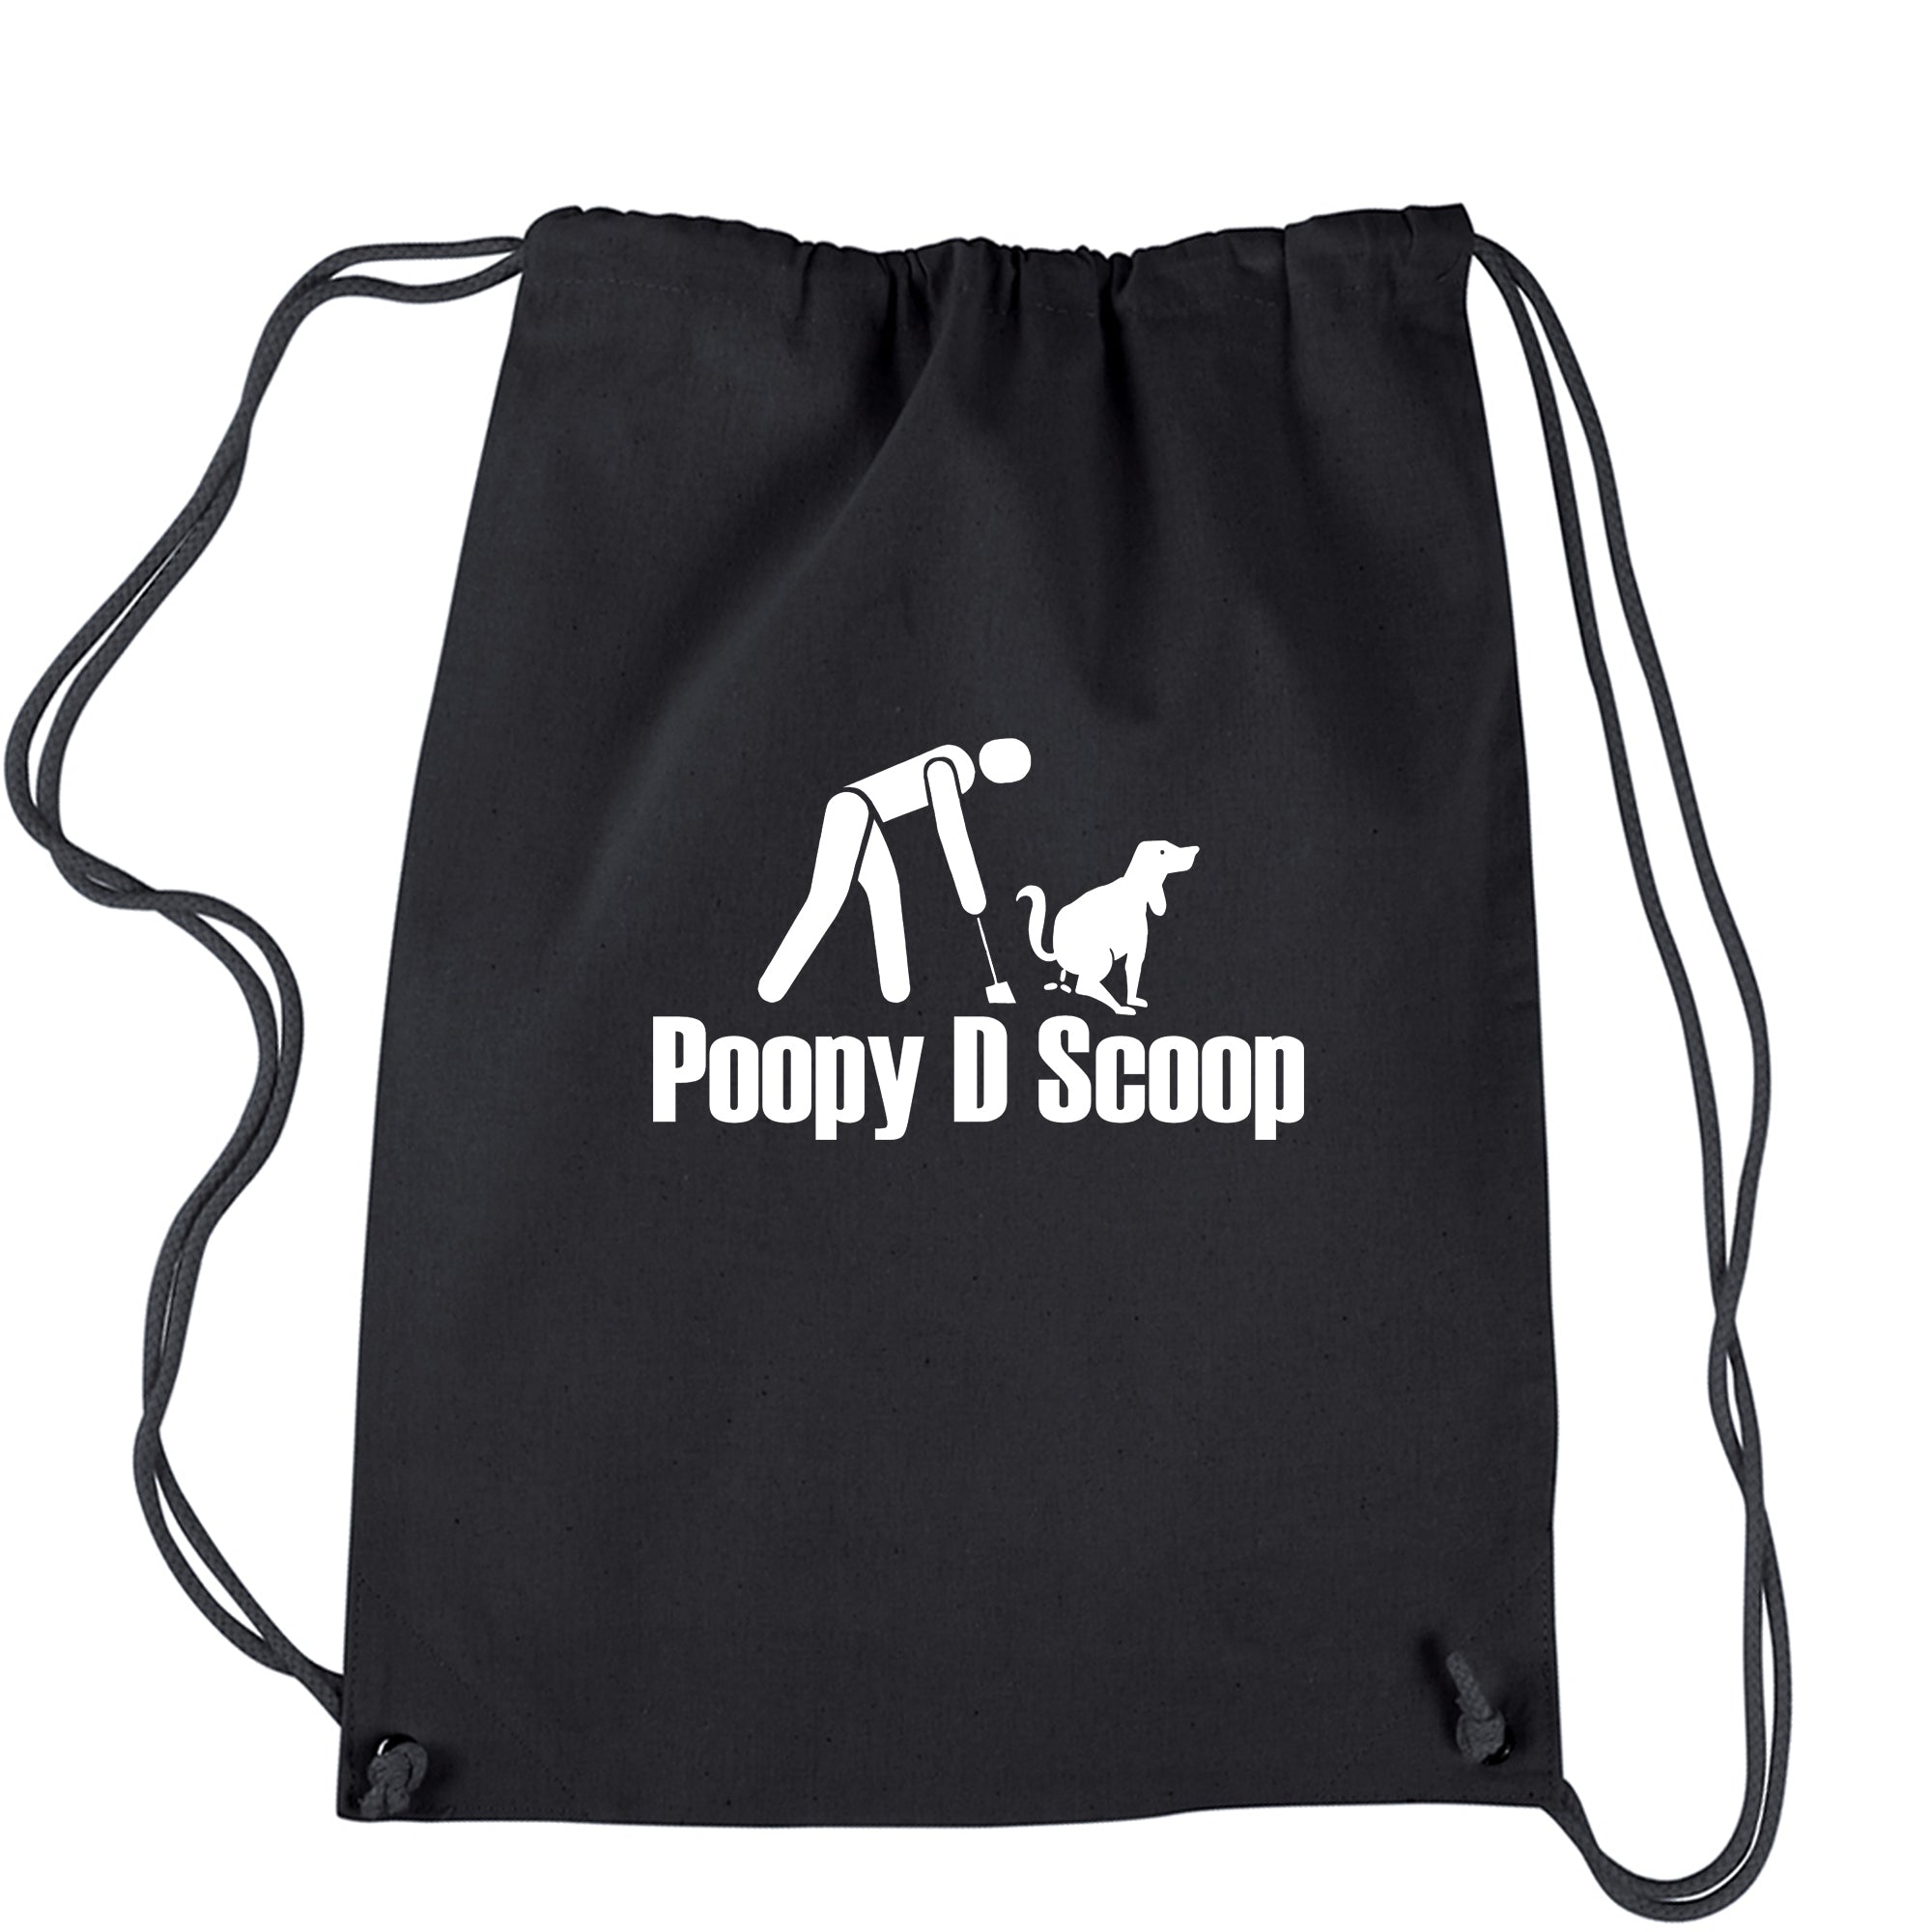 Lift Yourself Poopy Scoop Song Drawstring Backpack